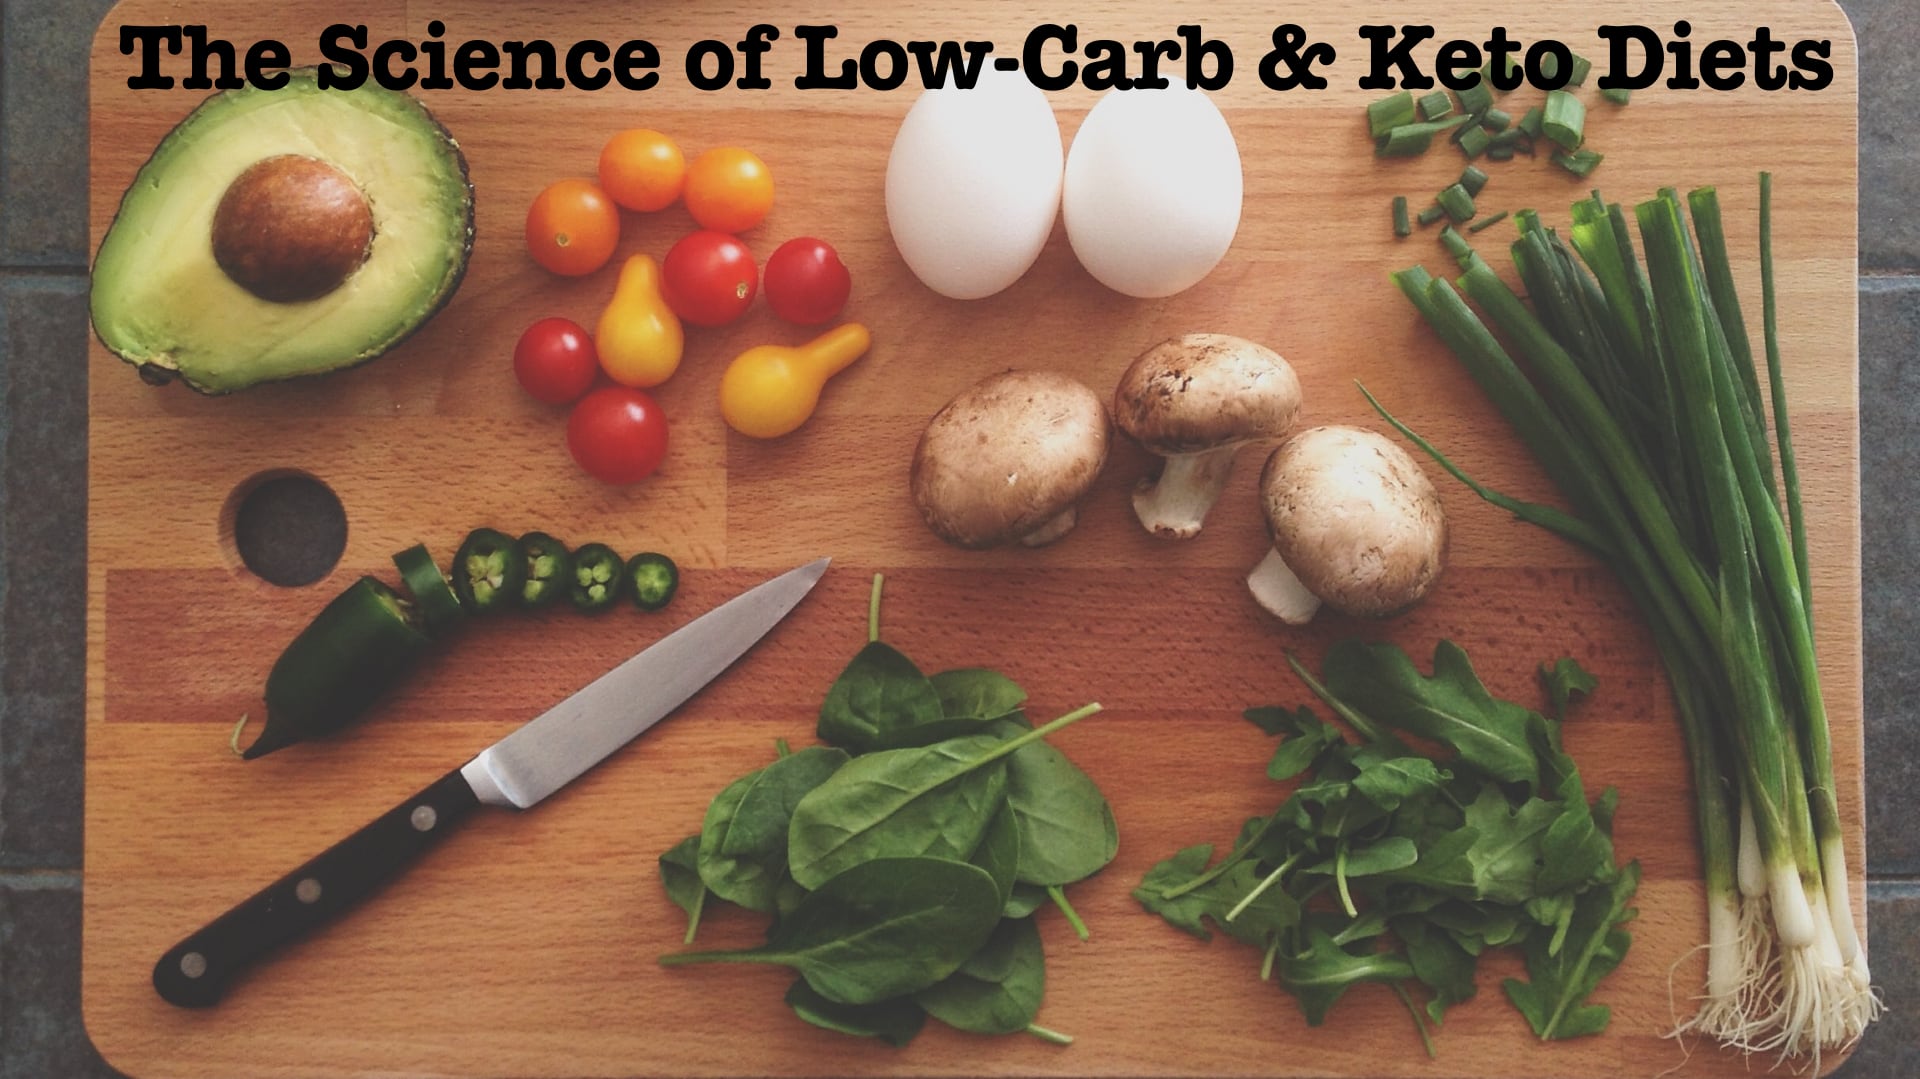 The Science of Low-Carb & Keto Diets